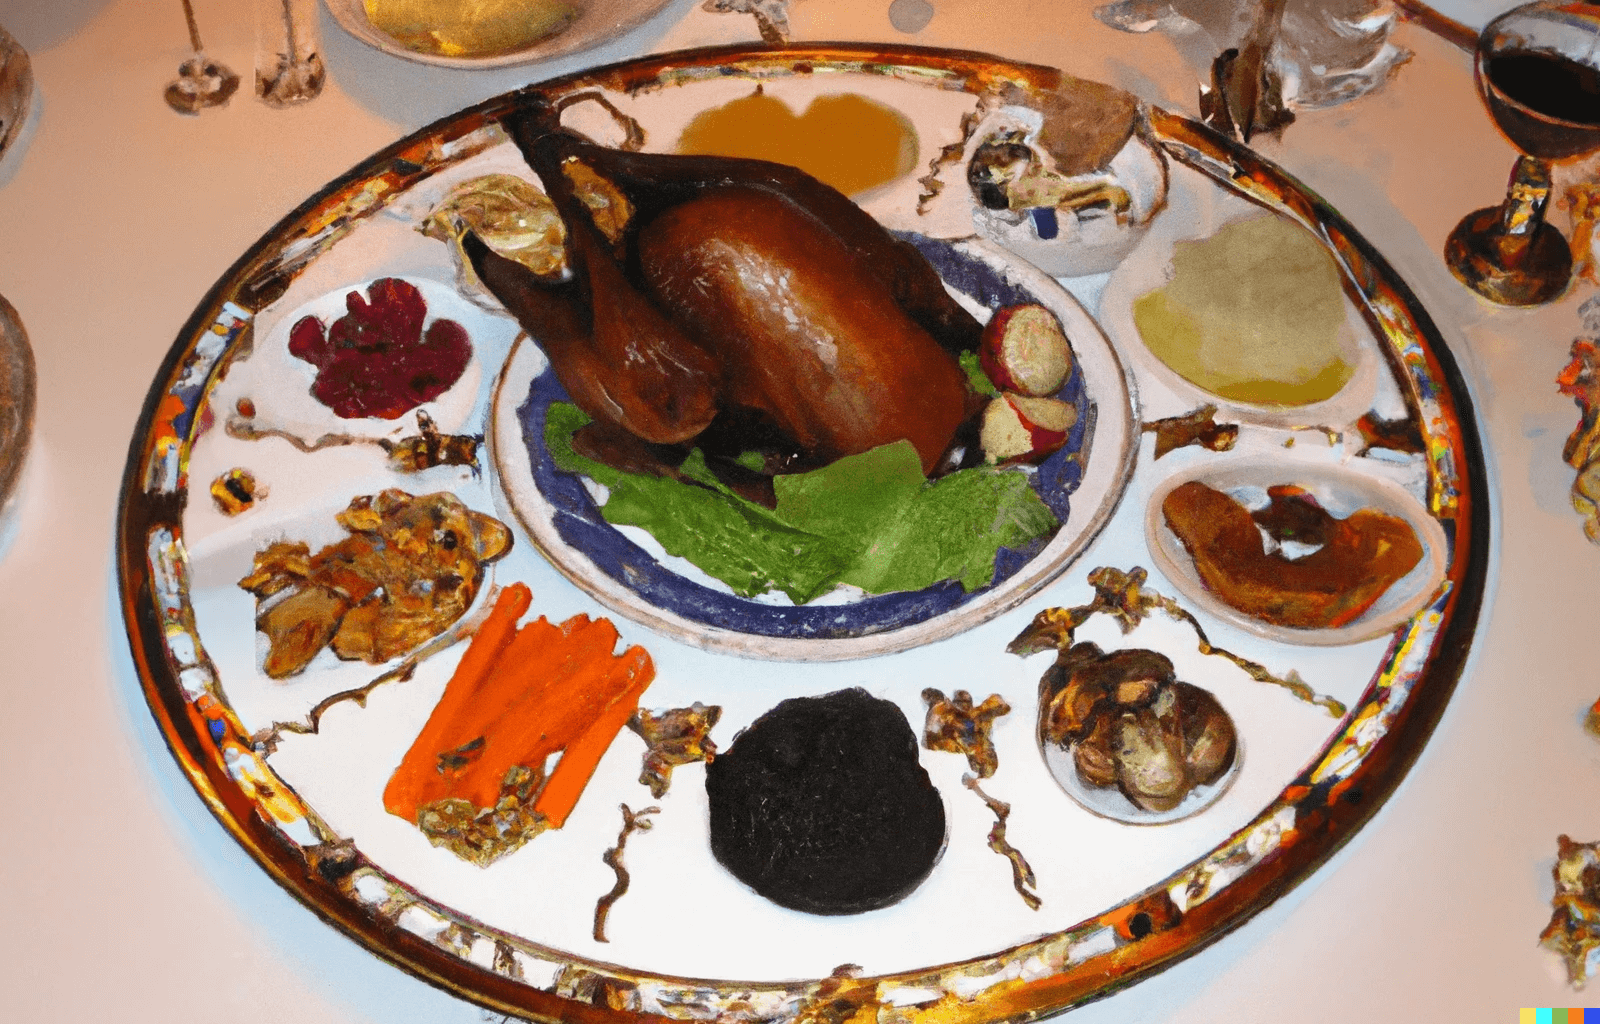 An AI-generated image of a Passover Seder plate with a Turkey.